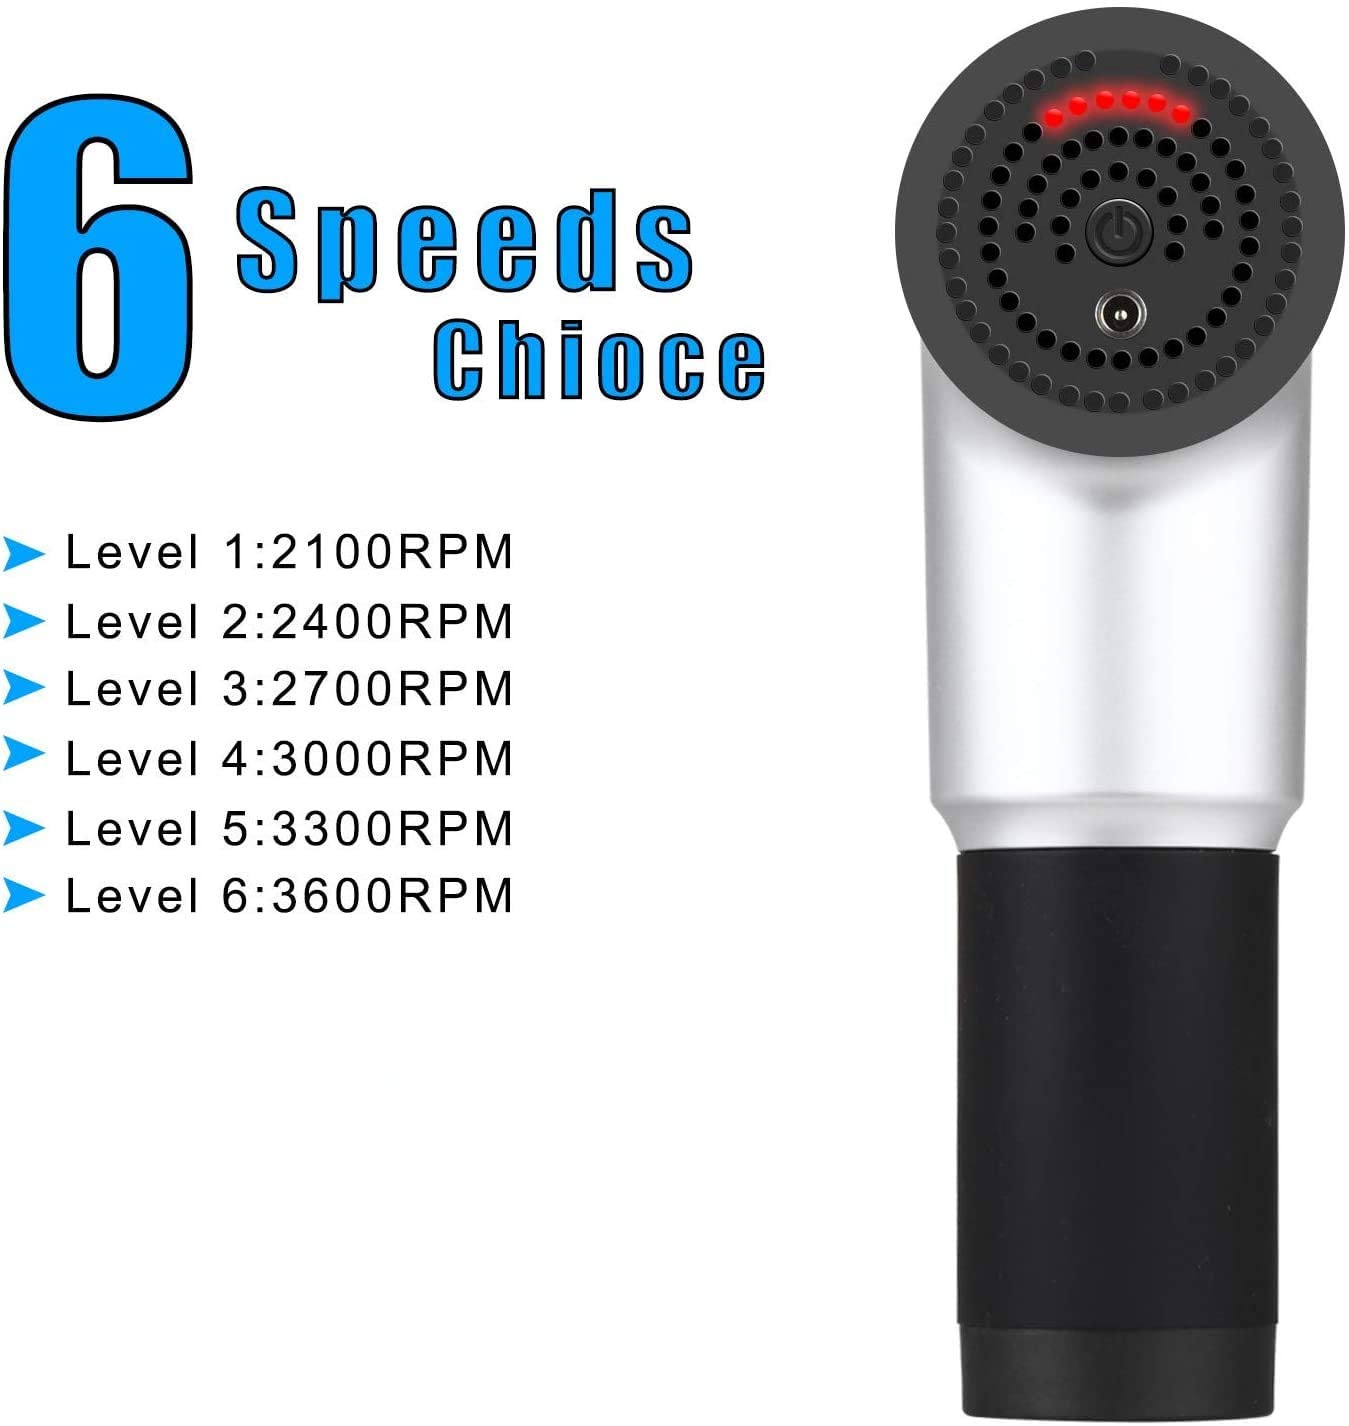 Cotsoco 6 Speeds Massage Gun, Cordless Handheld Body Neck Back Deep Tissue Muscle Massager, Rechargeable Percussion Device Super Quiet